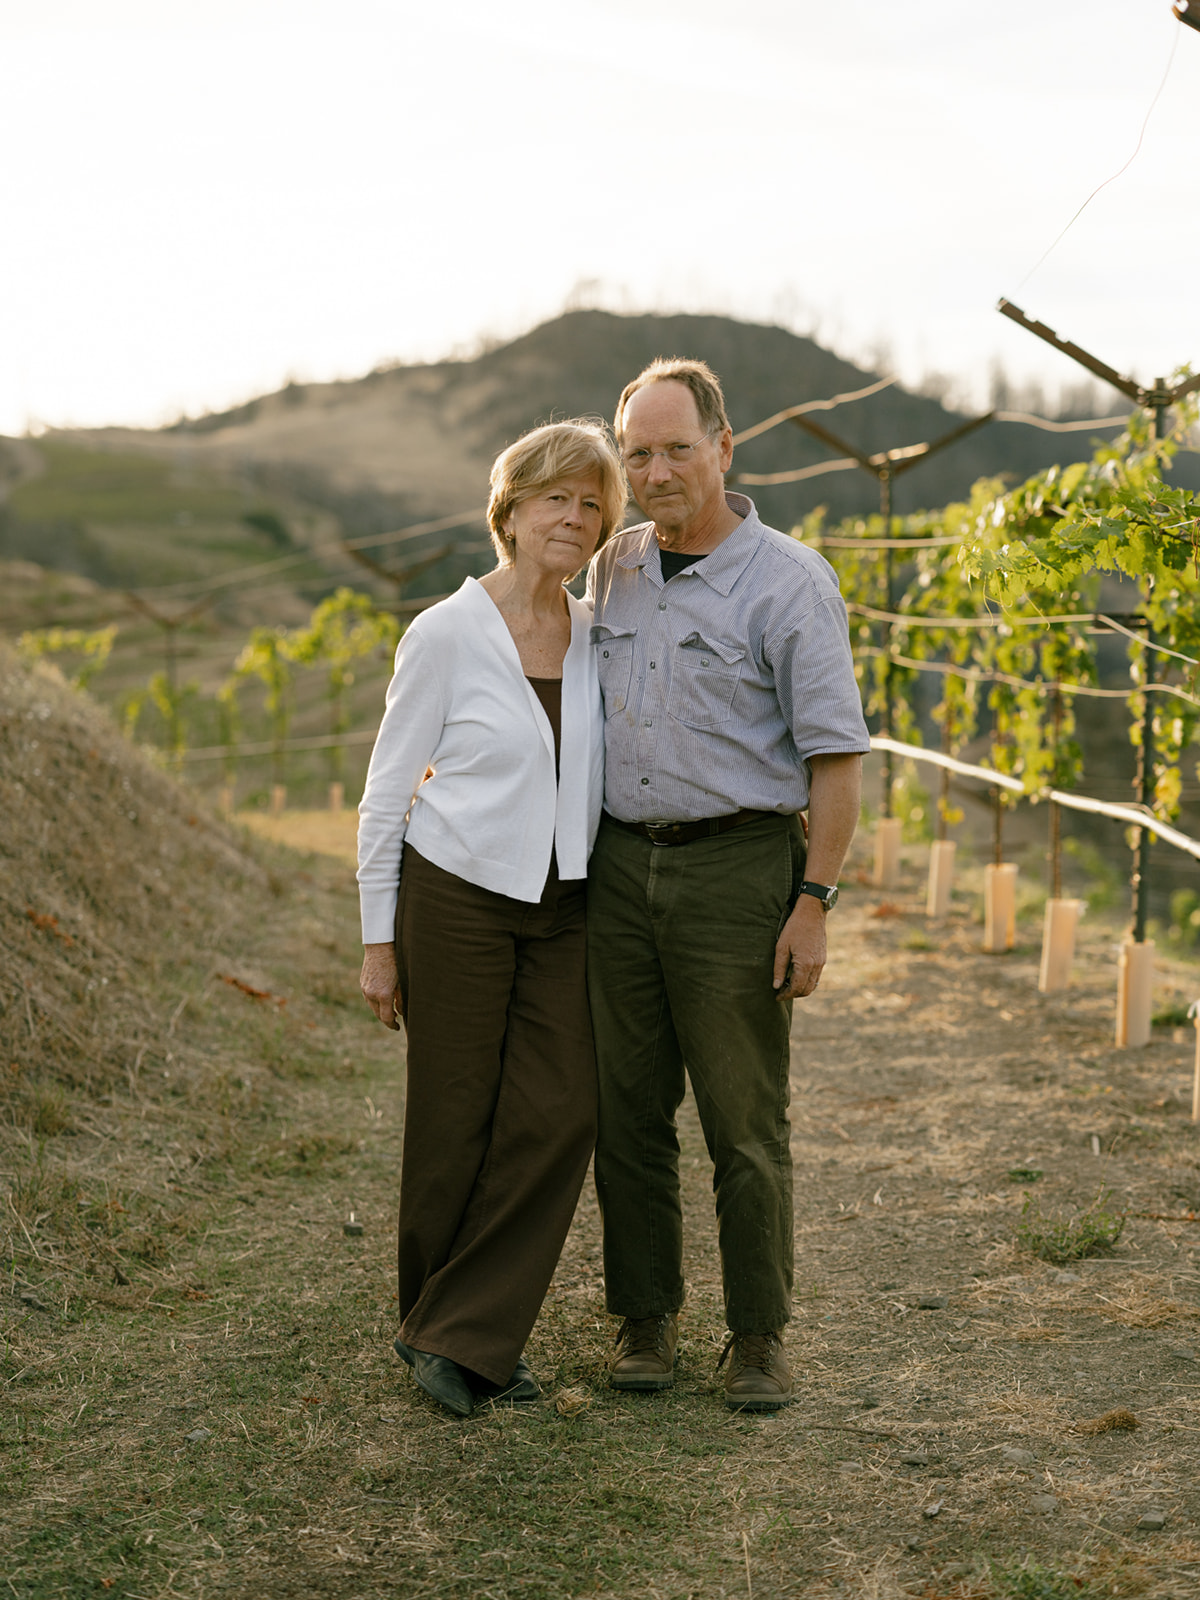 Katie Lazar and Chris Howell in the Cain Vineyard, regrowing after the Glass Fire. Photo by Meg Smith, courtesy of Club Oenologique.